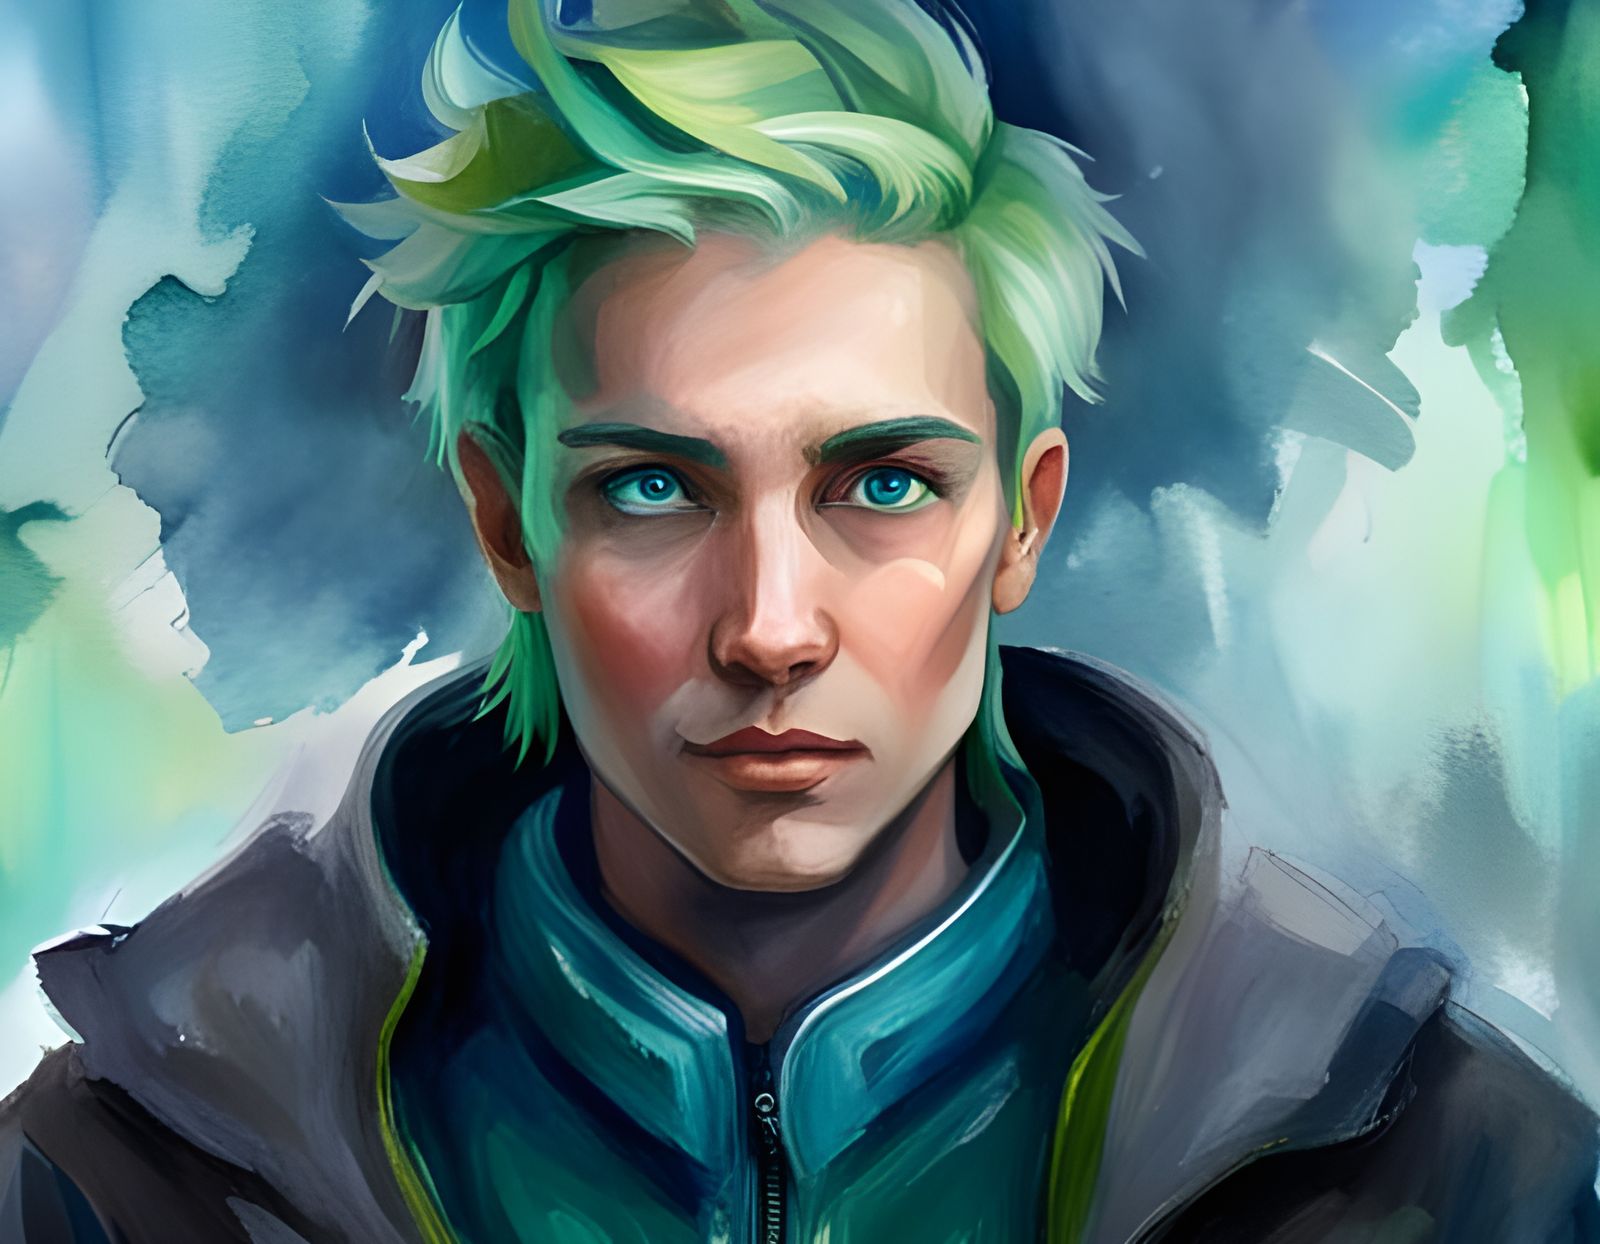 detailed energetic androgynous green-haired valorant character portrait ...